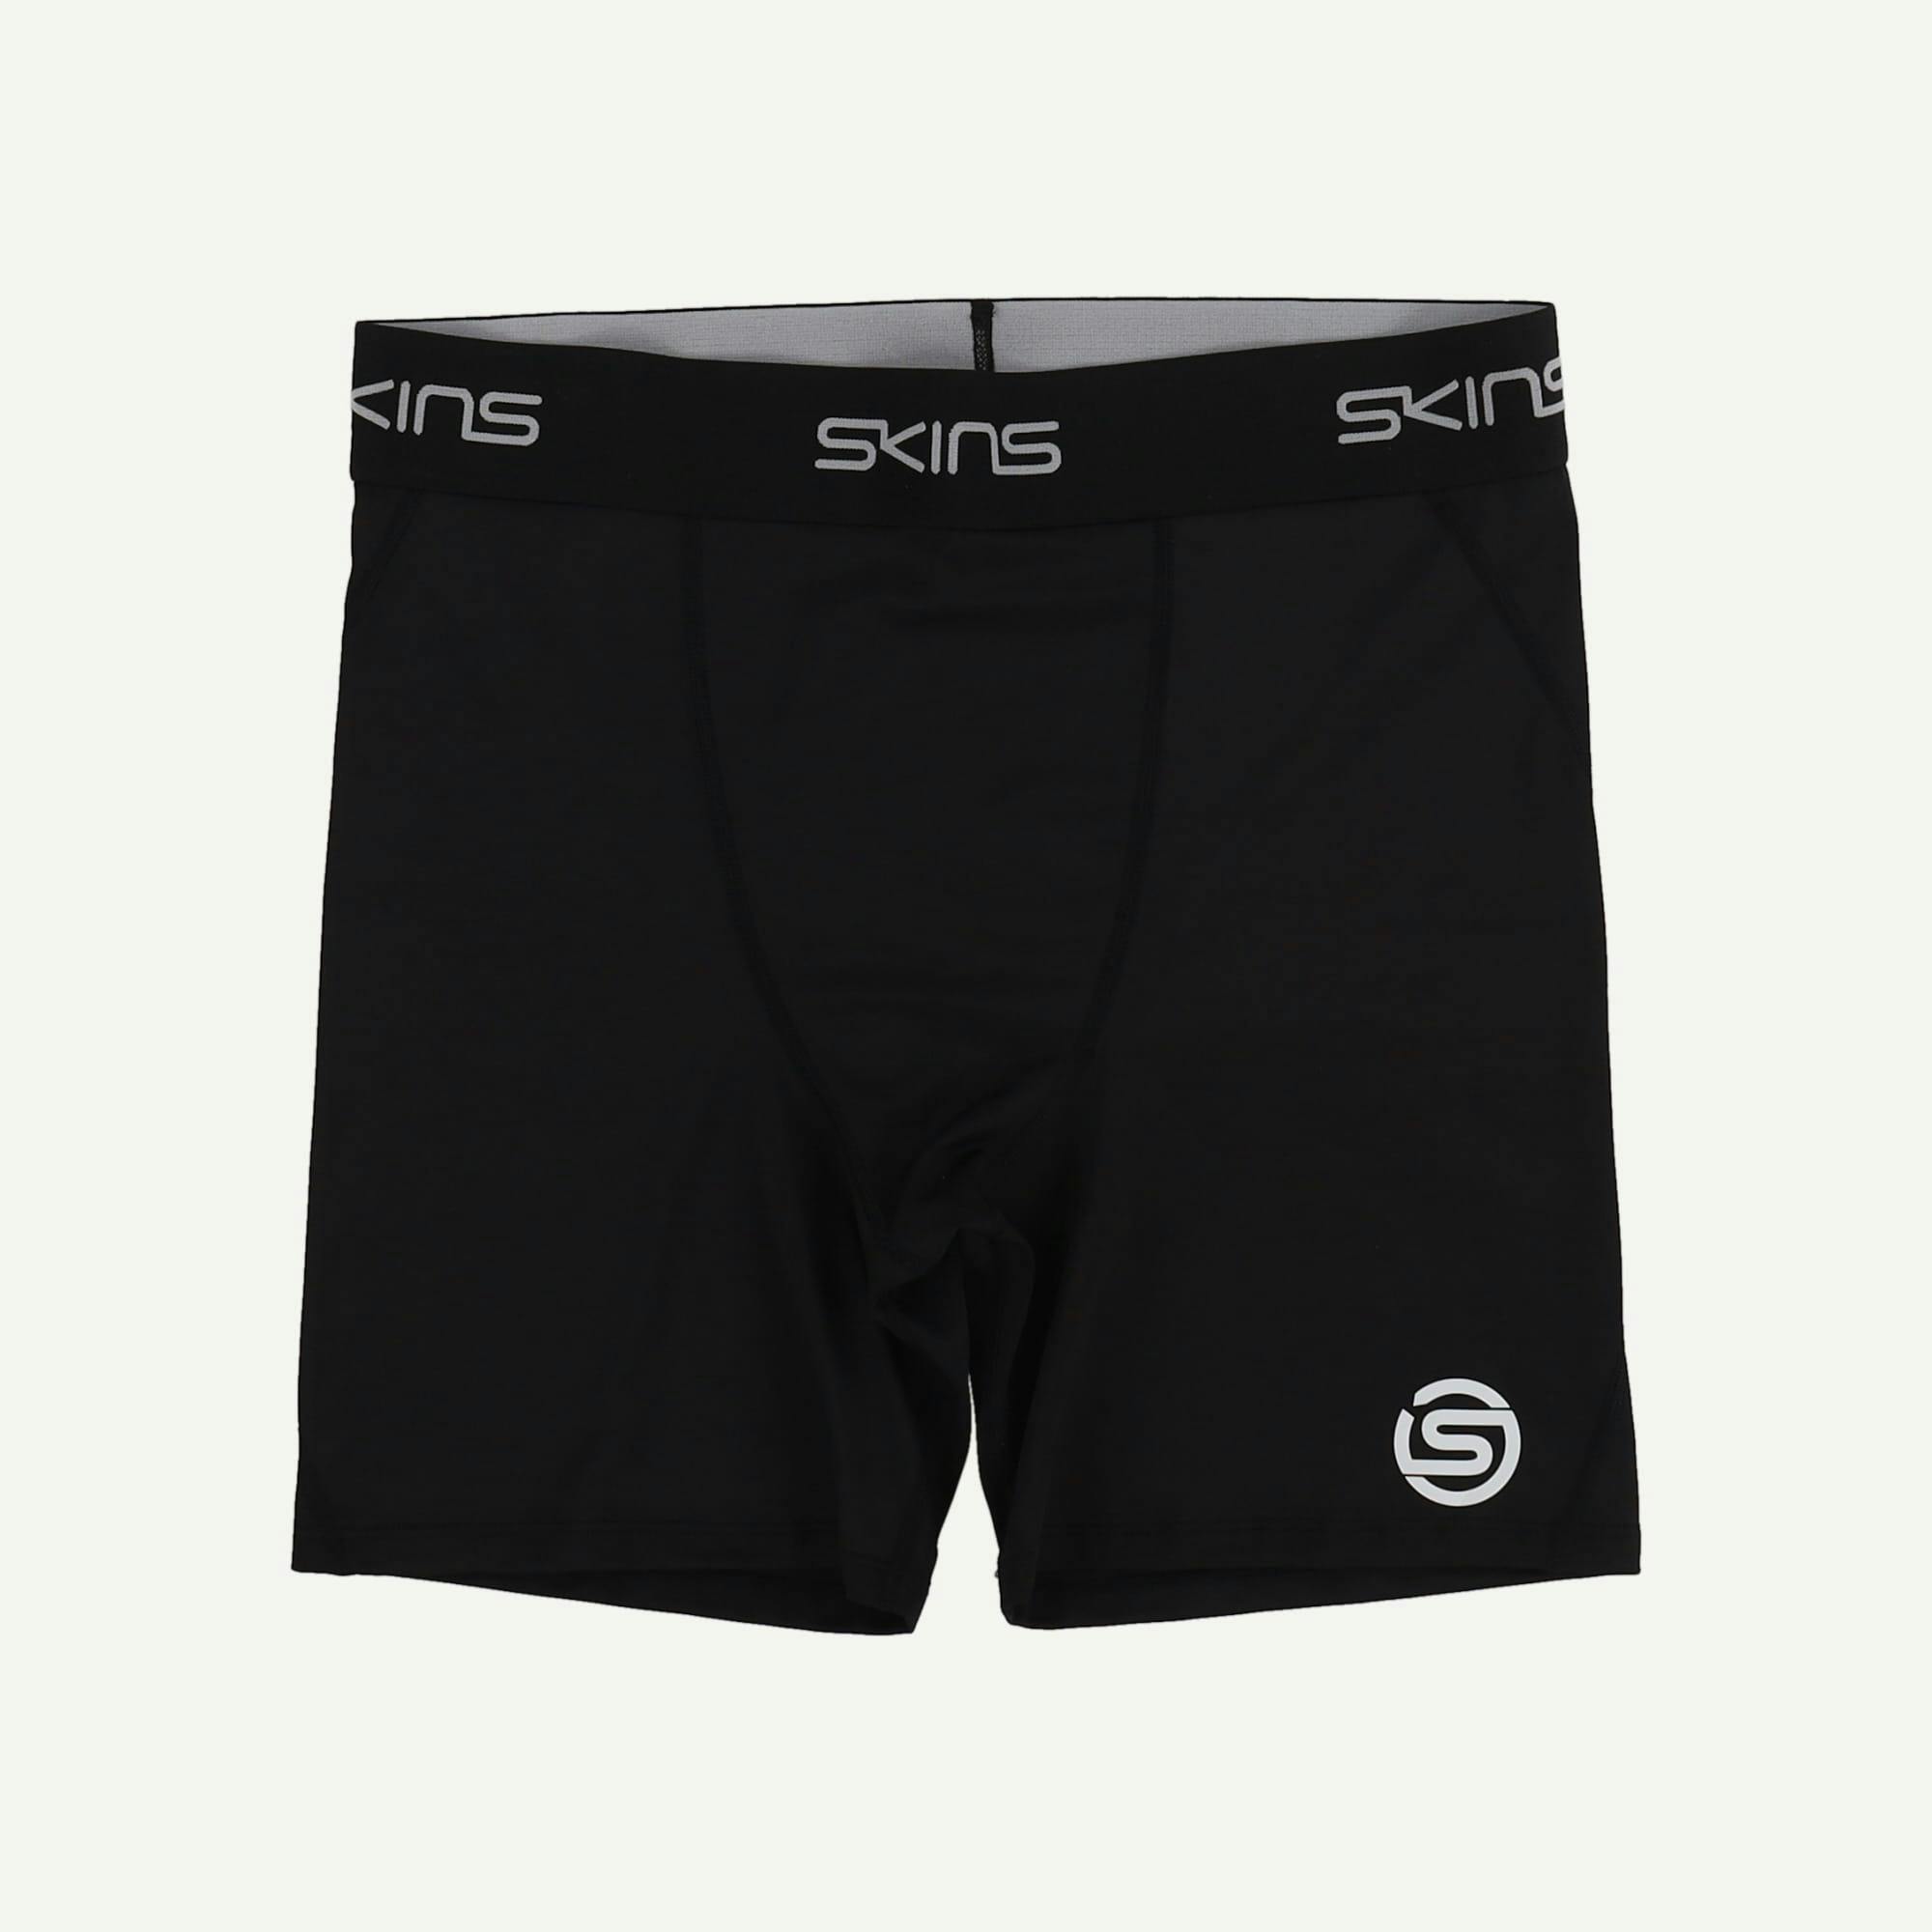 SKINS Compression As new Black Series 1 Shorts